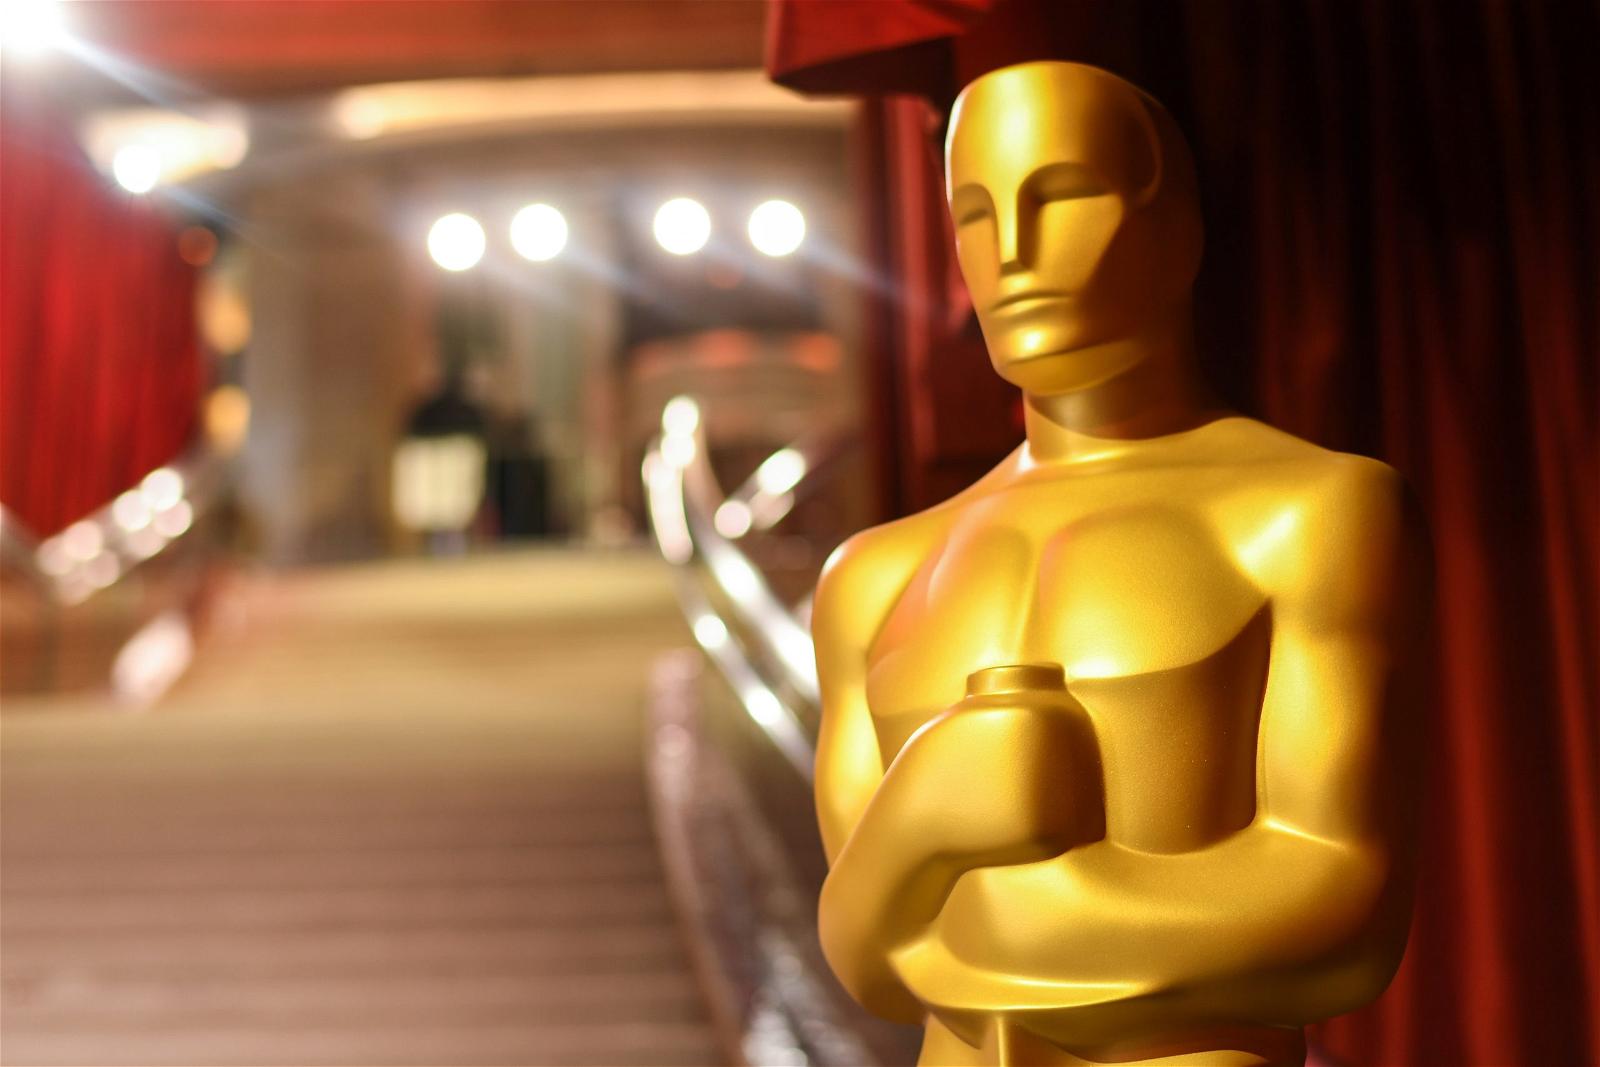  See full list of winners at the 96th Oscars